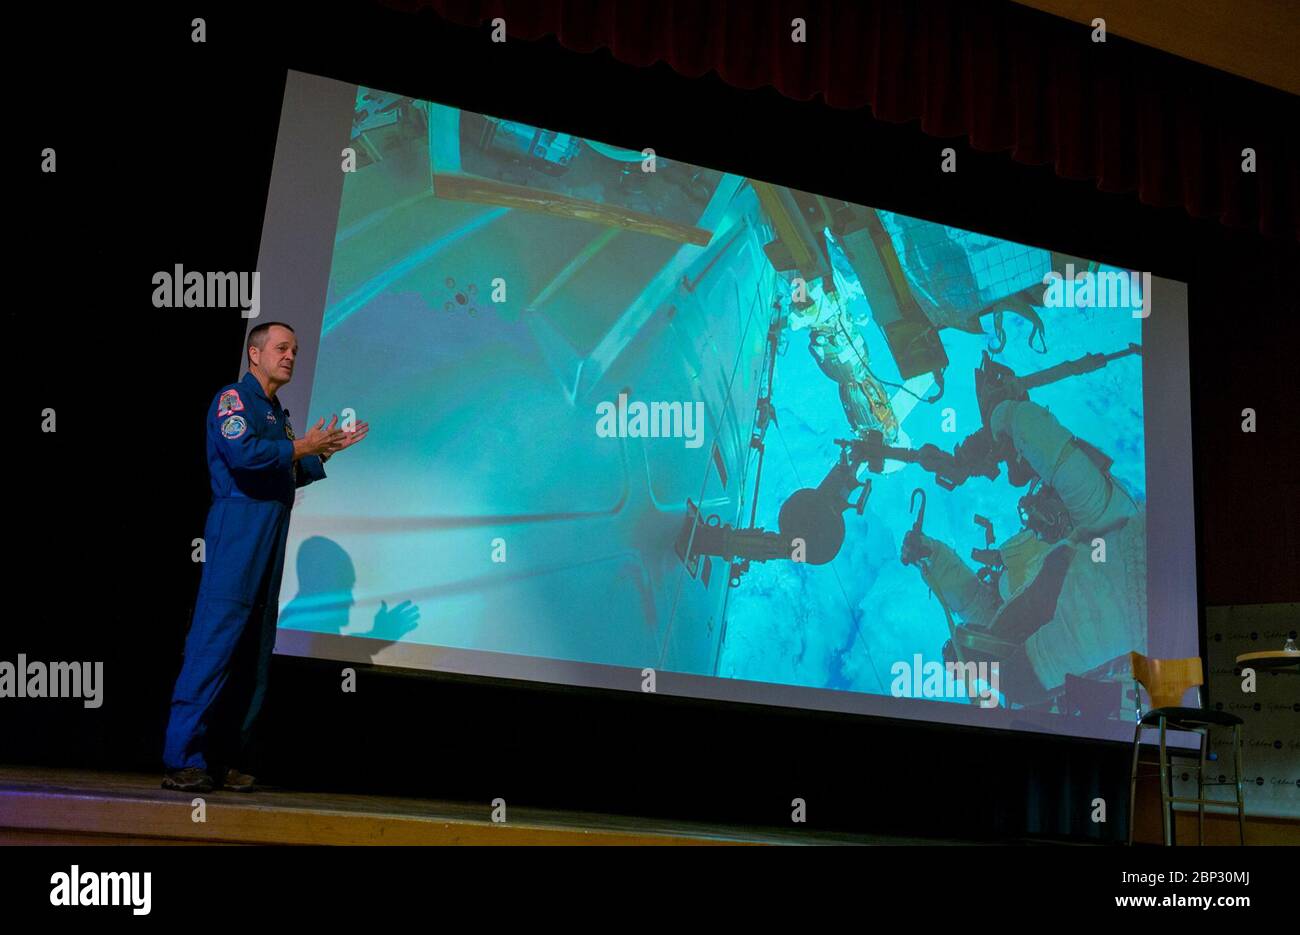 Astronaut Ricky Arnold at GSFC  NASA astronaut Ricky Arnold speaks about his time onboard the International Space Station, Thursday, May 2, 2019 at NASA’s Goddard Space Flight Center in Greenbelt, Md. During Arnold’s 197 days onboard the International Space Station, as part of Expeditions 55 and 56, he ventured outside the space station on three spacewalks in addition to conducting numerous experiments and educational downlink events. Stock Photo